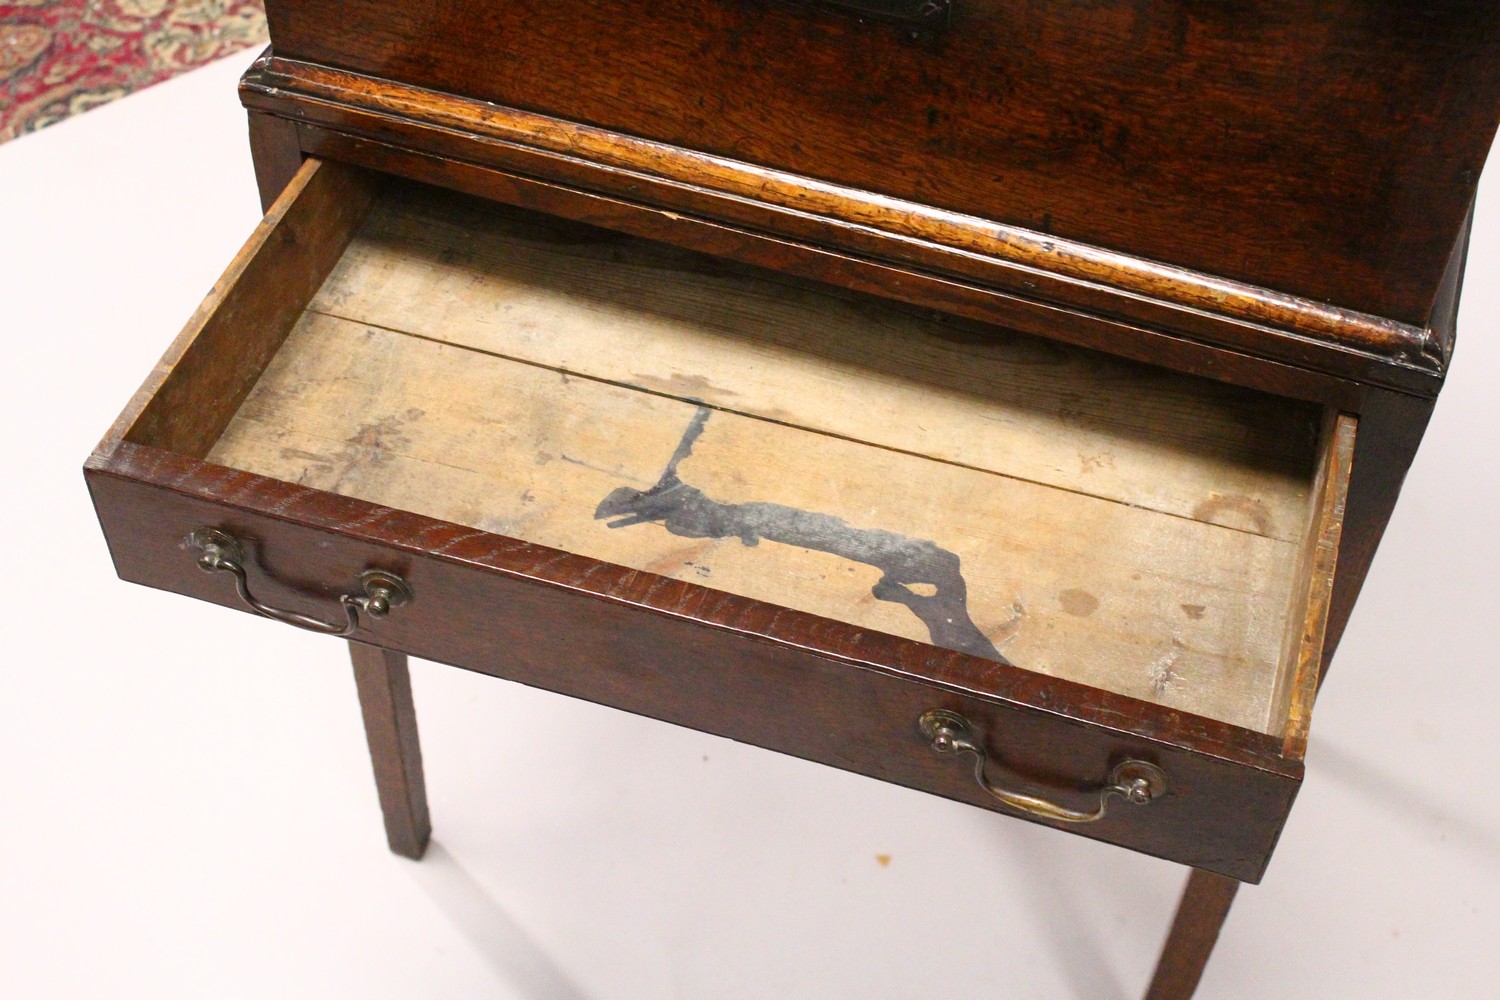 AN 19TH CENTURY OAK DESK ON STAND, with sloping front, fitted interior with small drawers, on a - Image 10 of 19